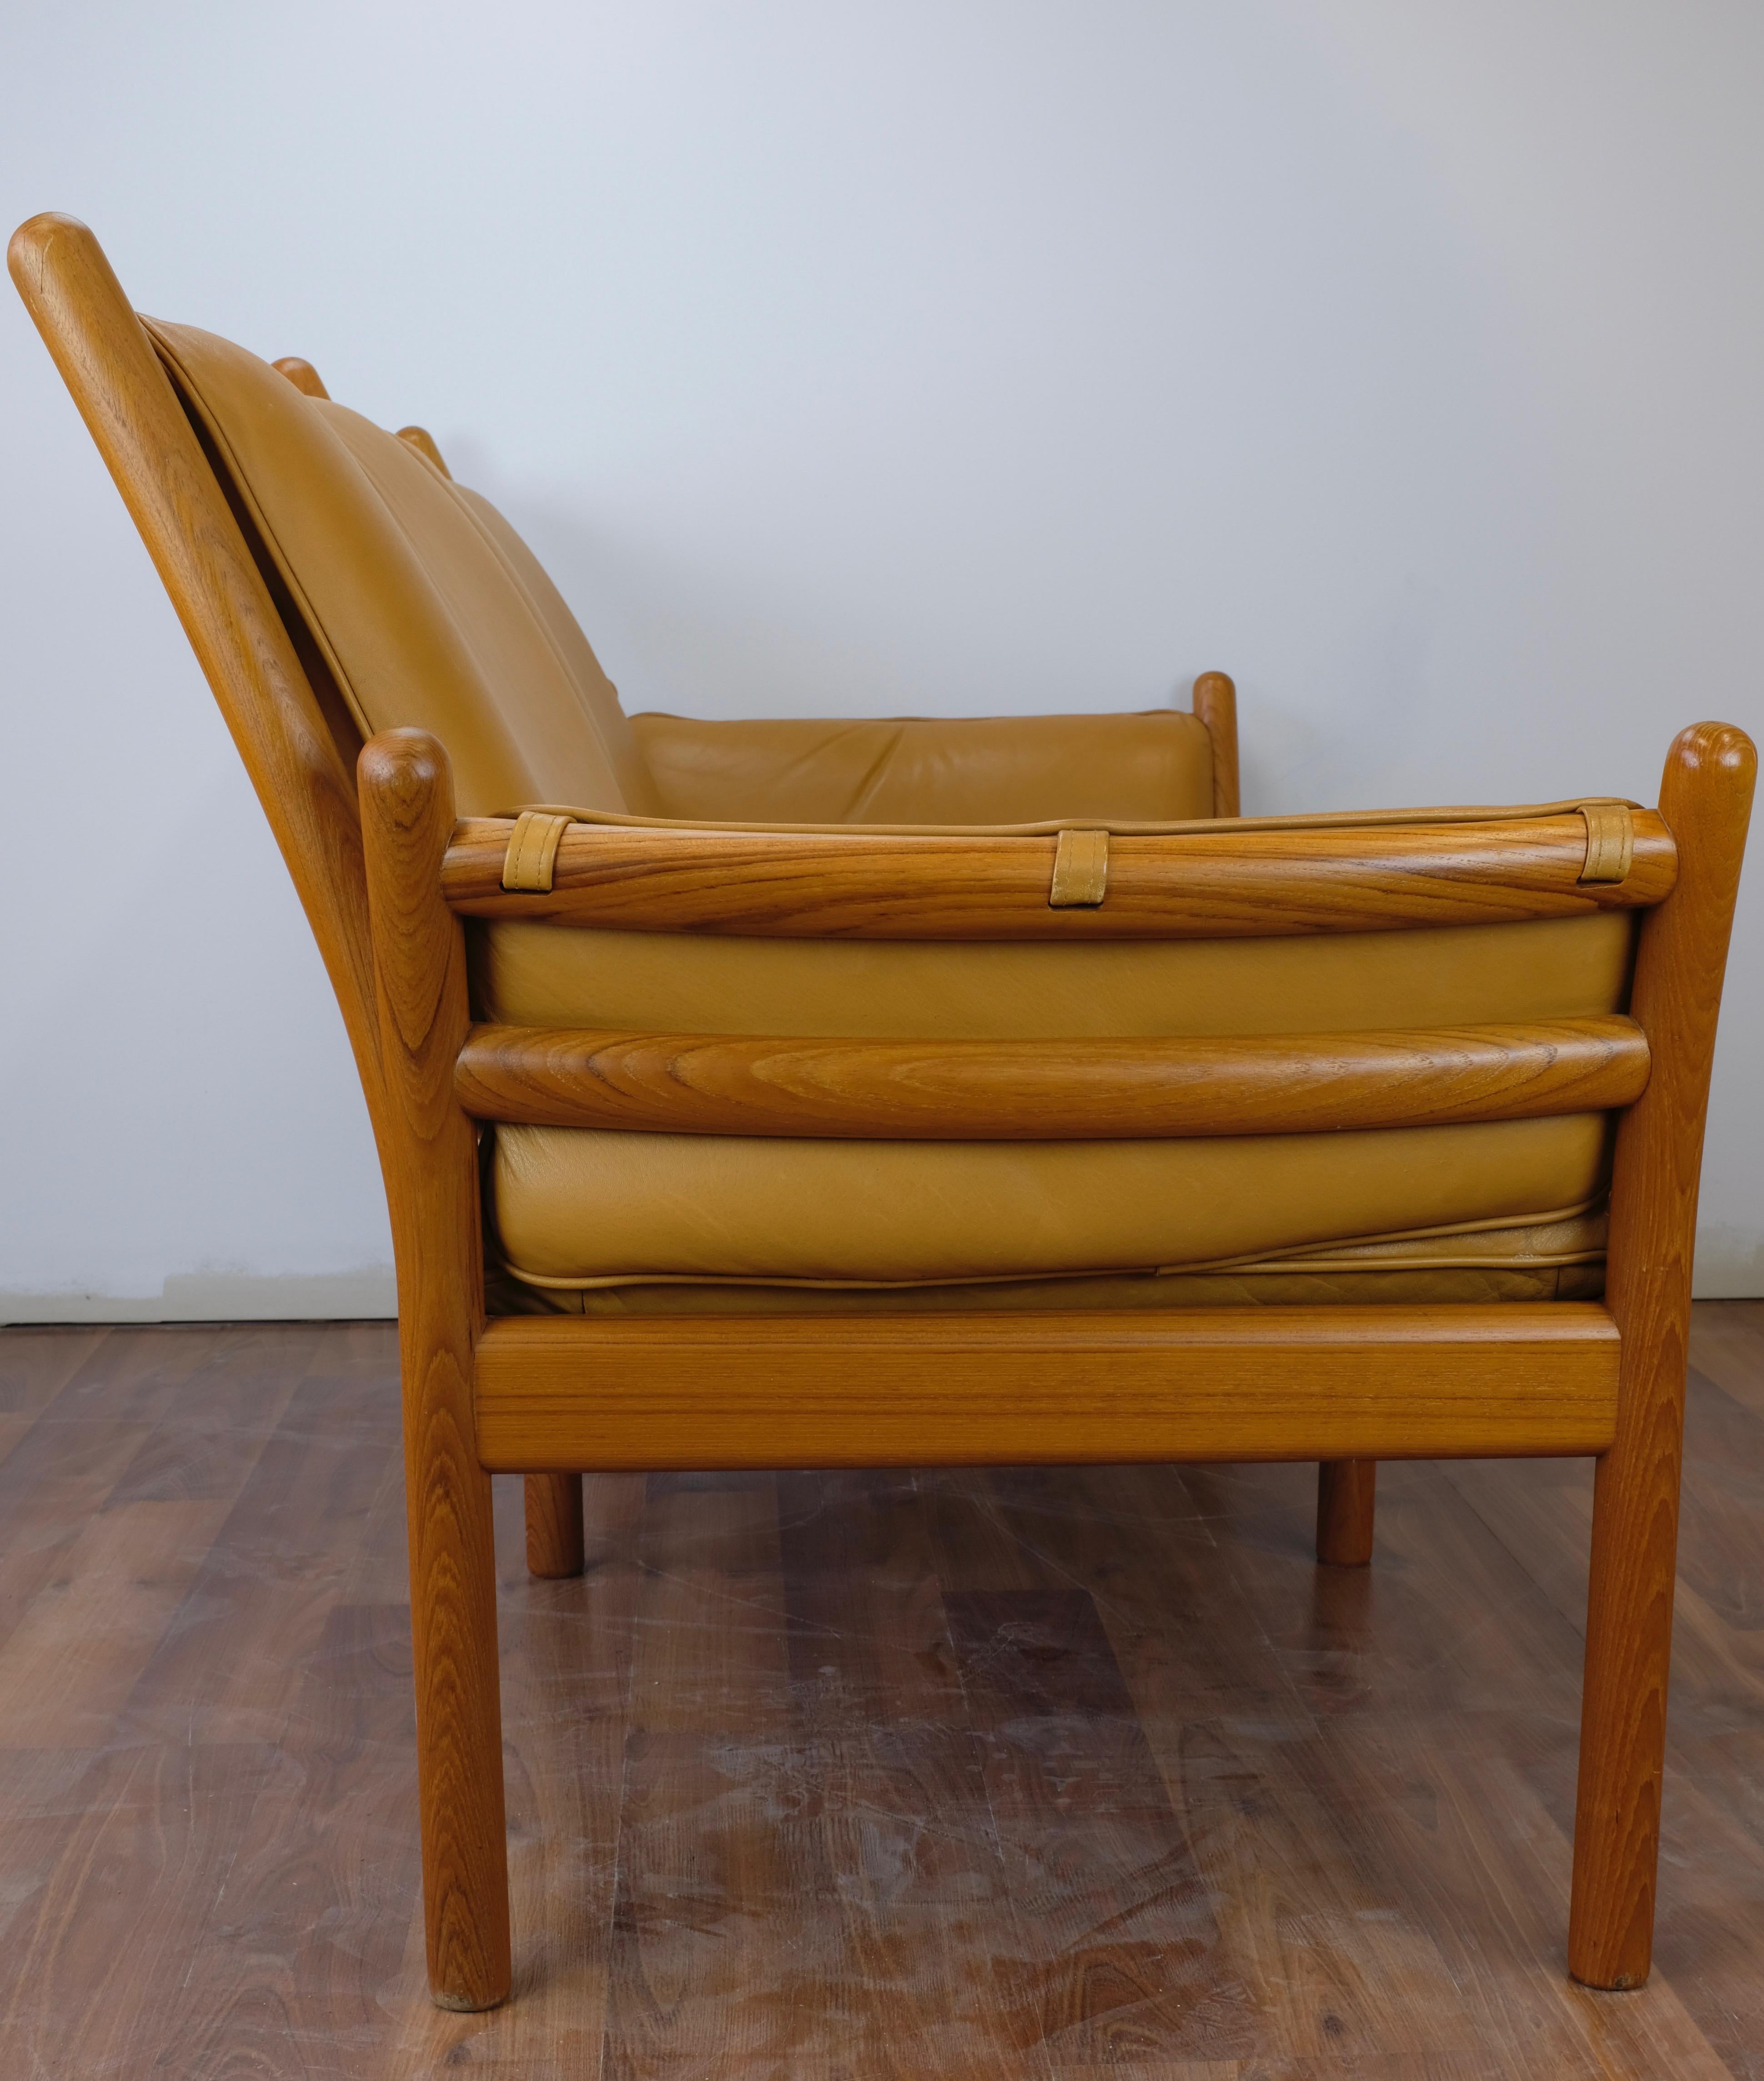 One 'Genius' loveseat designed by Illum Wikkelsø and made in Denmark by CF Christensen Silkeborg.

The frame is constructed of solid teak. Cognac leather seat cushions are loose while back and arm cushions are secured to the frame with straps and